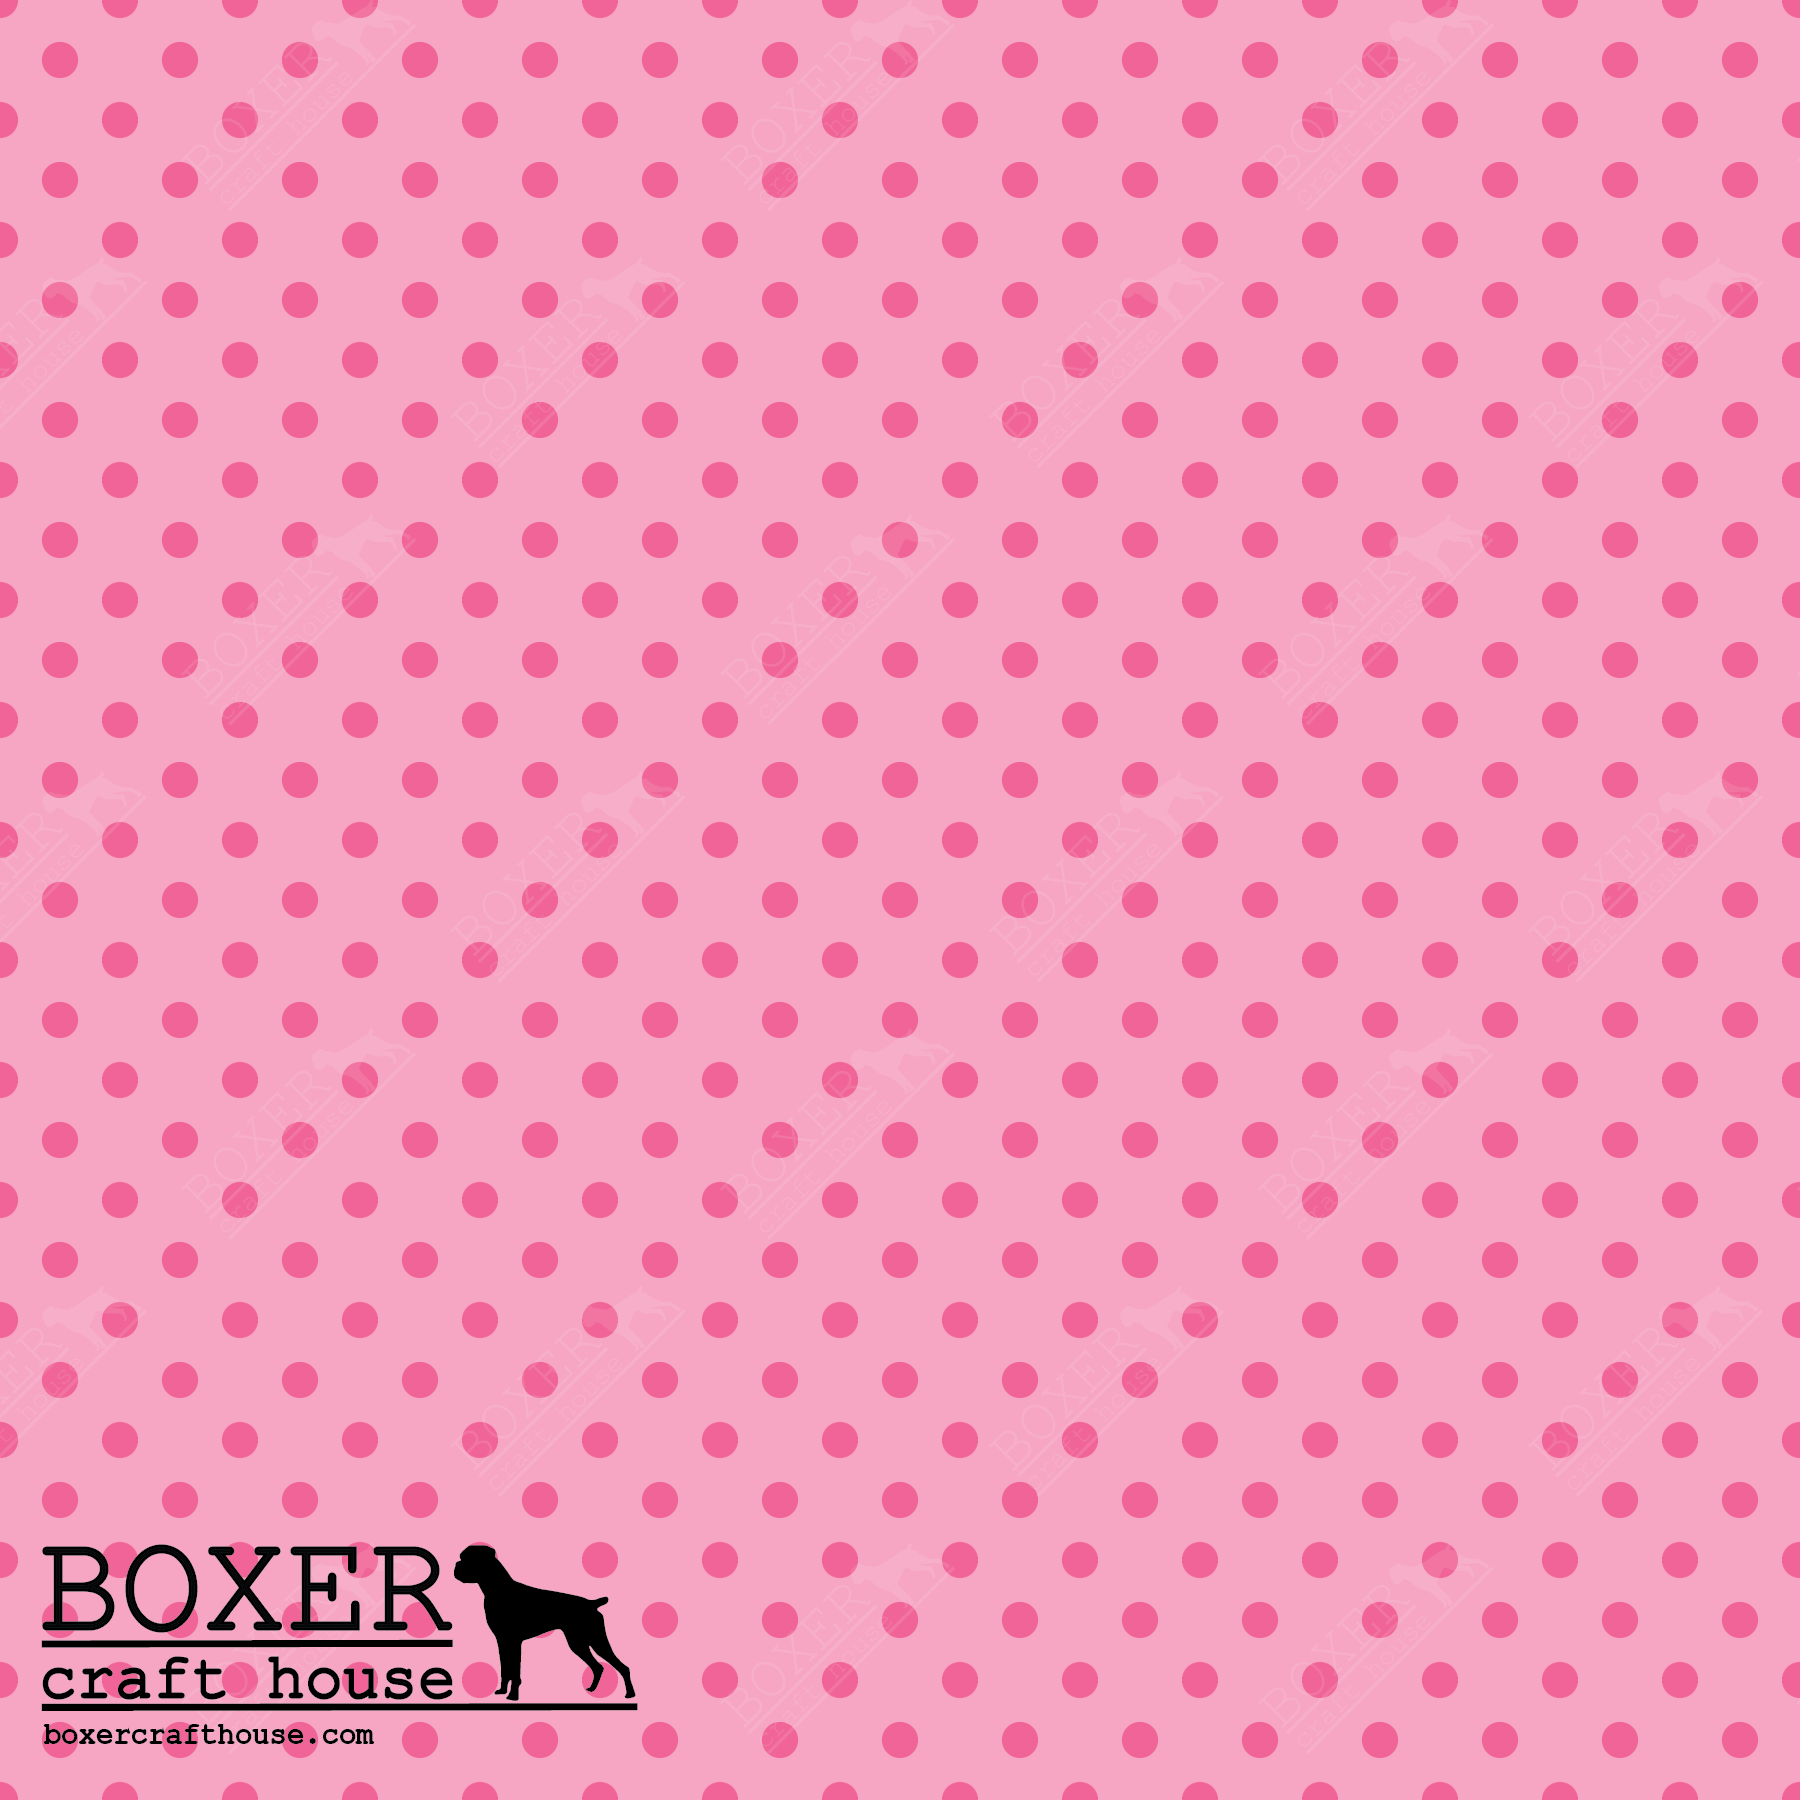 Breast Cancer Faux Leather, Embroidery Vinyl, Sewing Faux Leather, Bag Making Supplies, Faux Leather For Embroidery, Quality Faux Leather, Embroidery Supplies, Sewing Supplies, Woman Owned Business, Craft Supply Store, USA, In the Hoop Supplies, Sewing with vinyl,Specialty Vinyl, Printed in the USA Faux Leather,Pink, Wear pink, Love the tatas, Breast Cancer Embroidery Vinyl, Breast Cancer Faux Leather